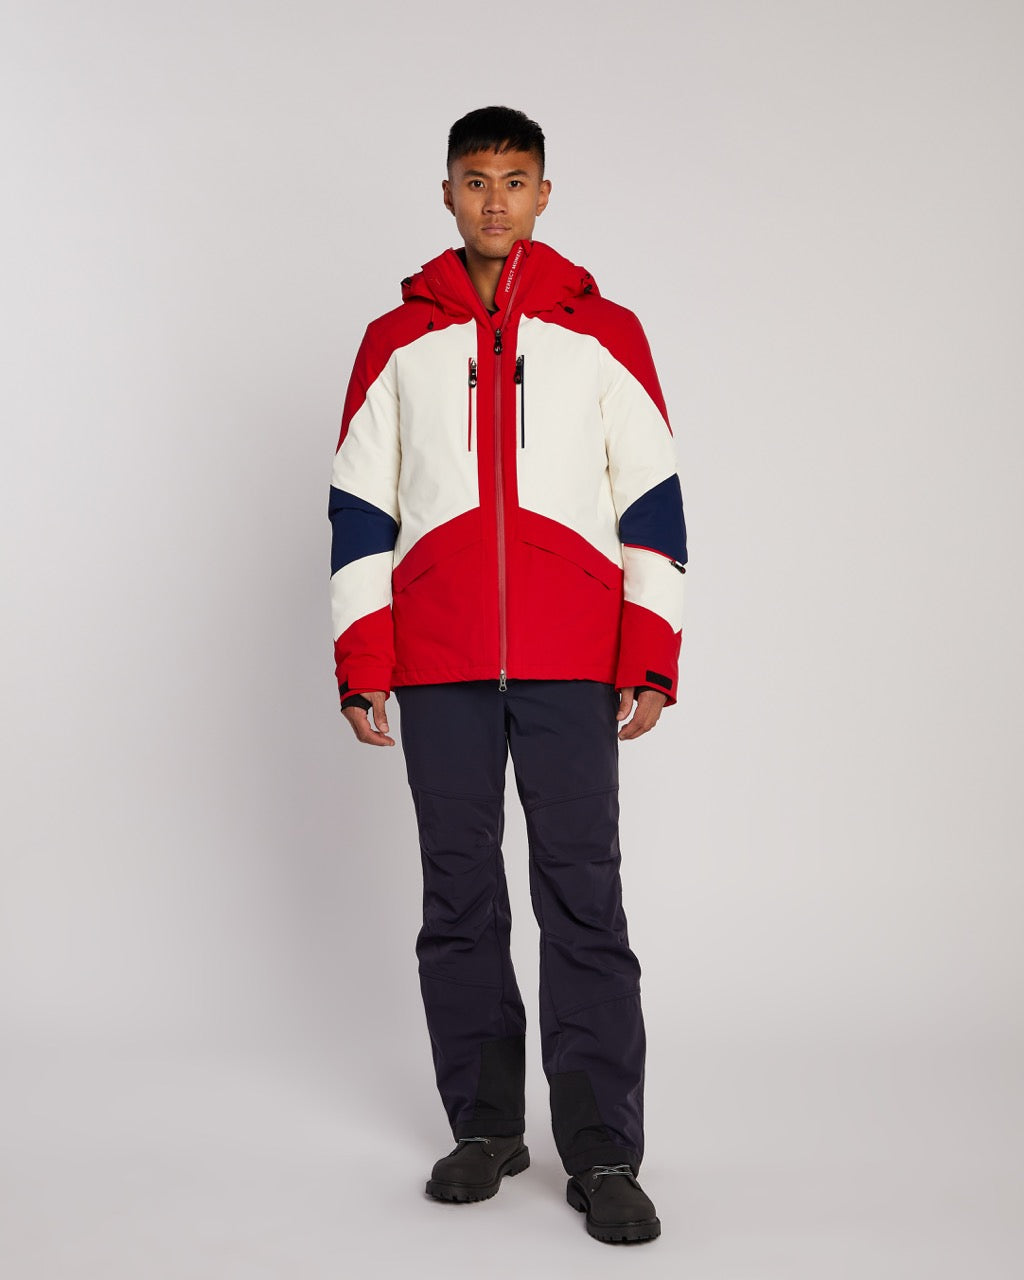 Perfect Moment Men's Chamonix II Jacket in Red, White & Navy